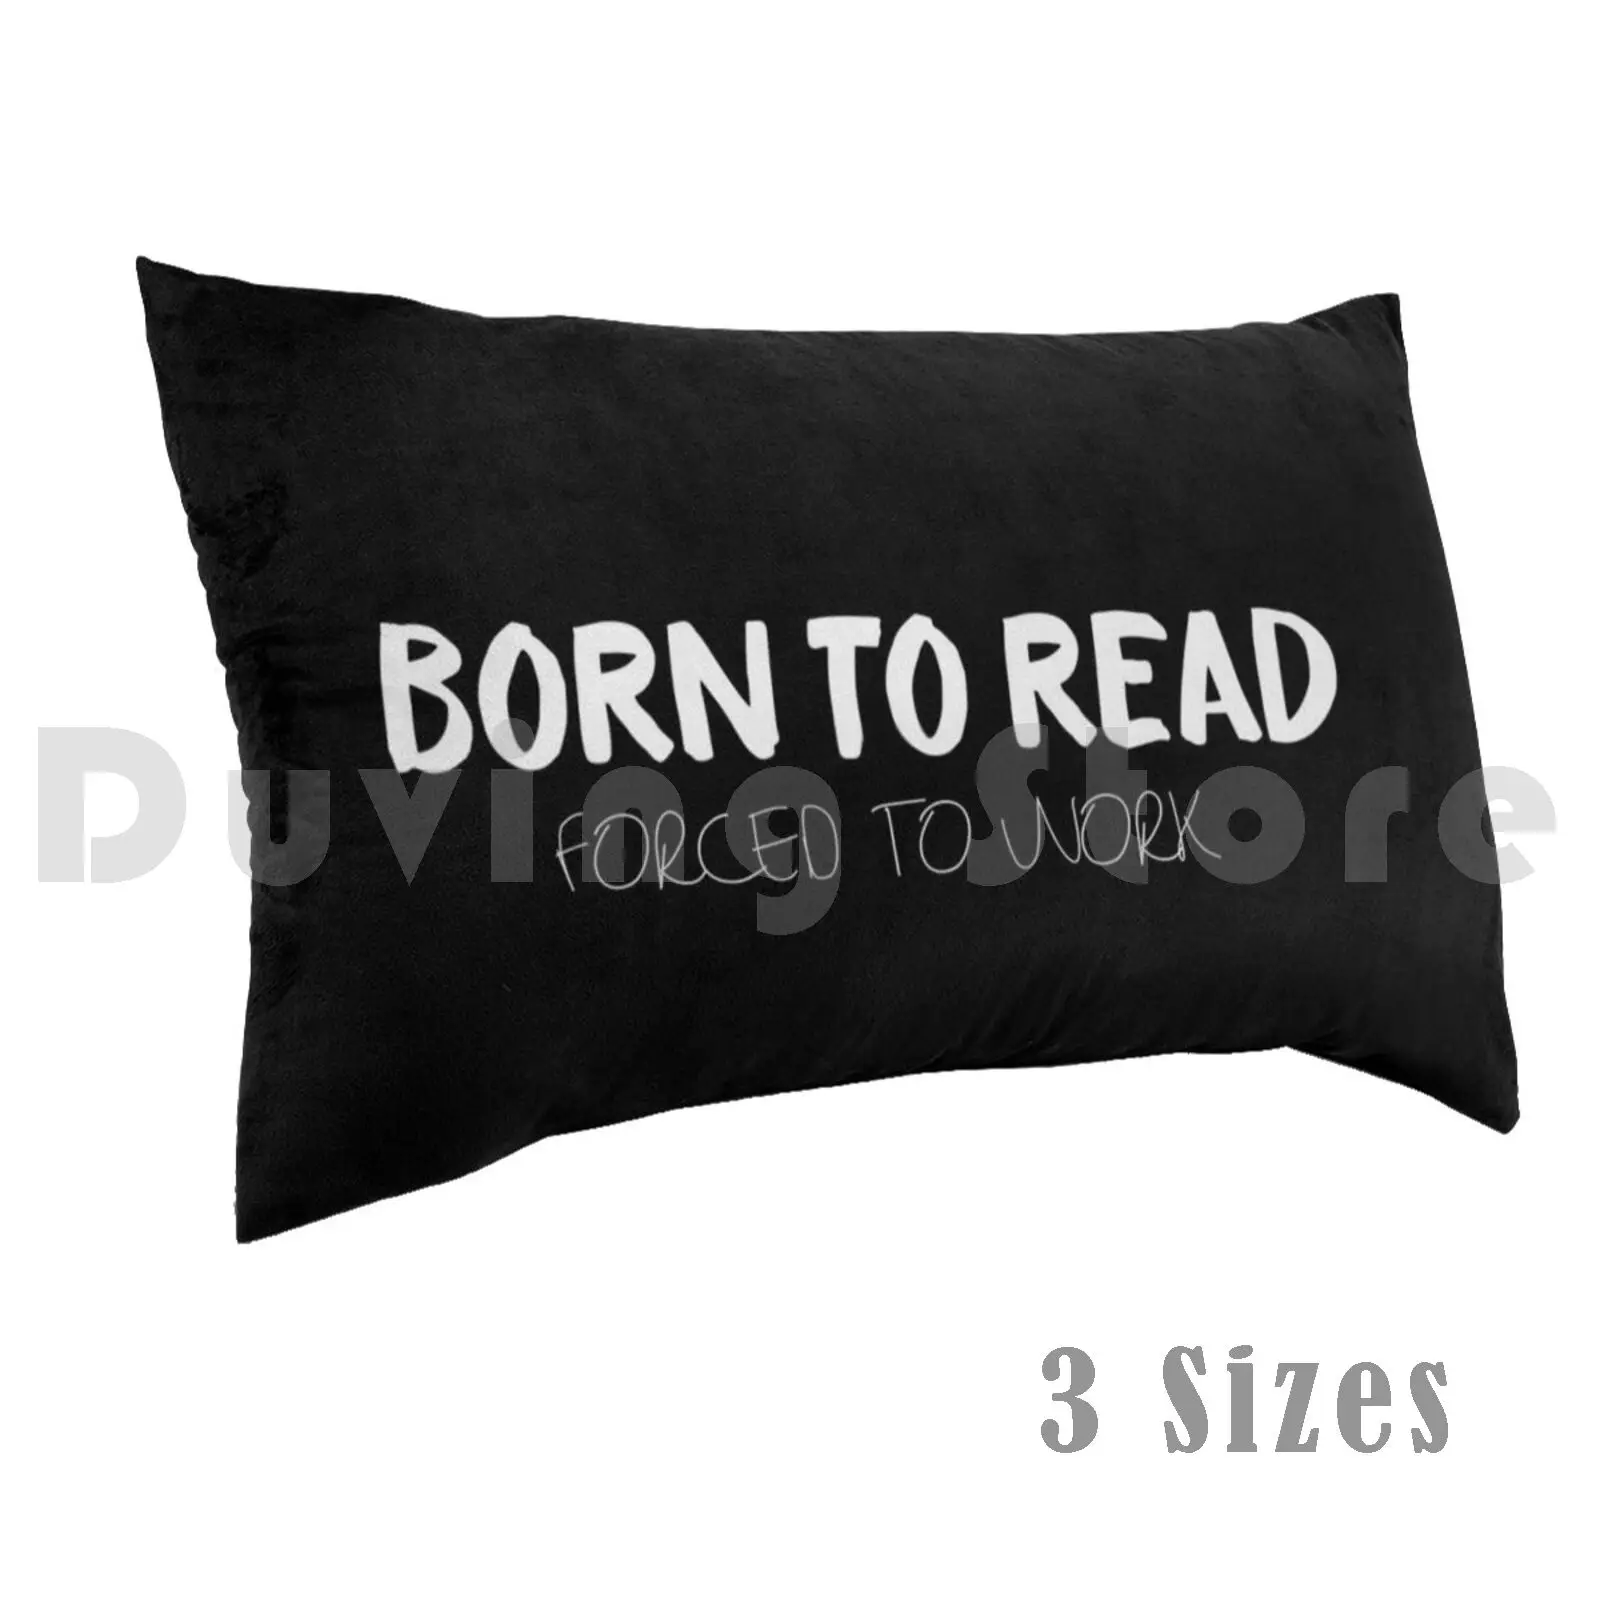 Born To Read. Forced To Work. Bookworm Problems Pillow Case Printed 35x50 Born To Read Bookworm Bookish Booklover